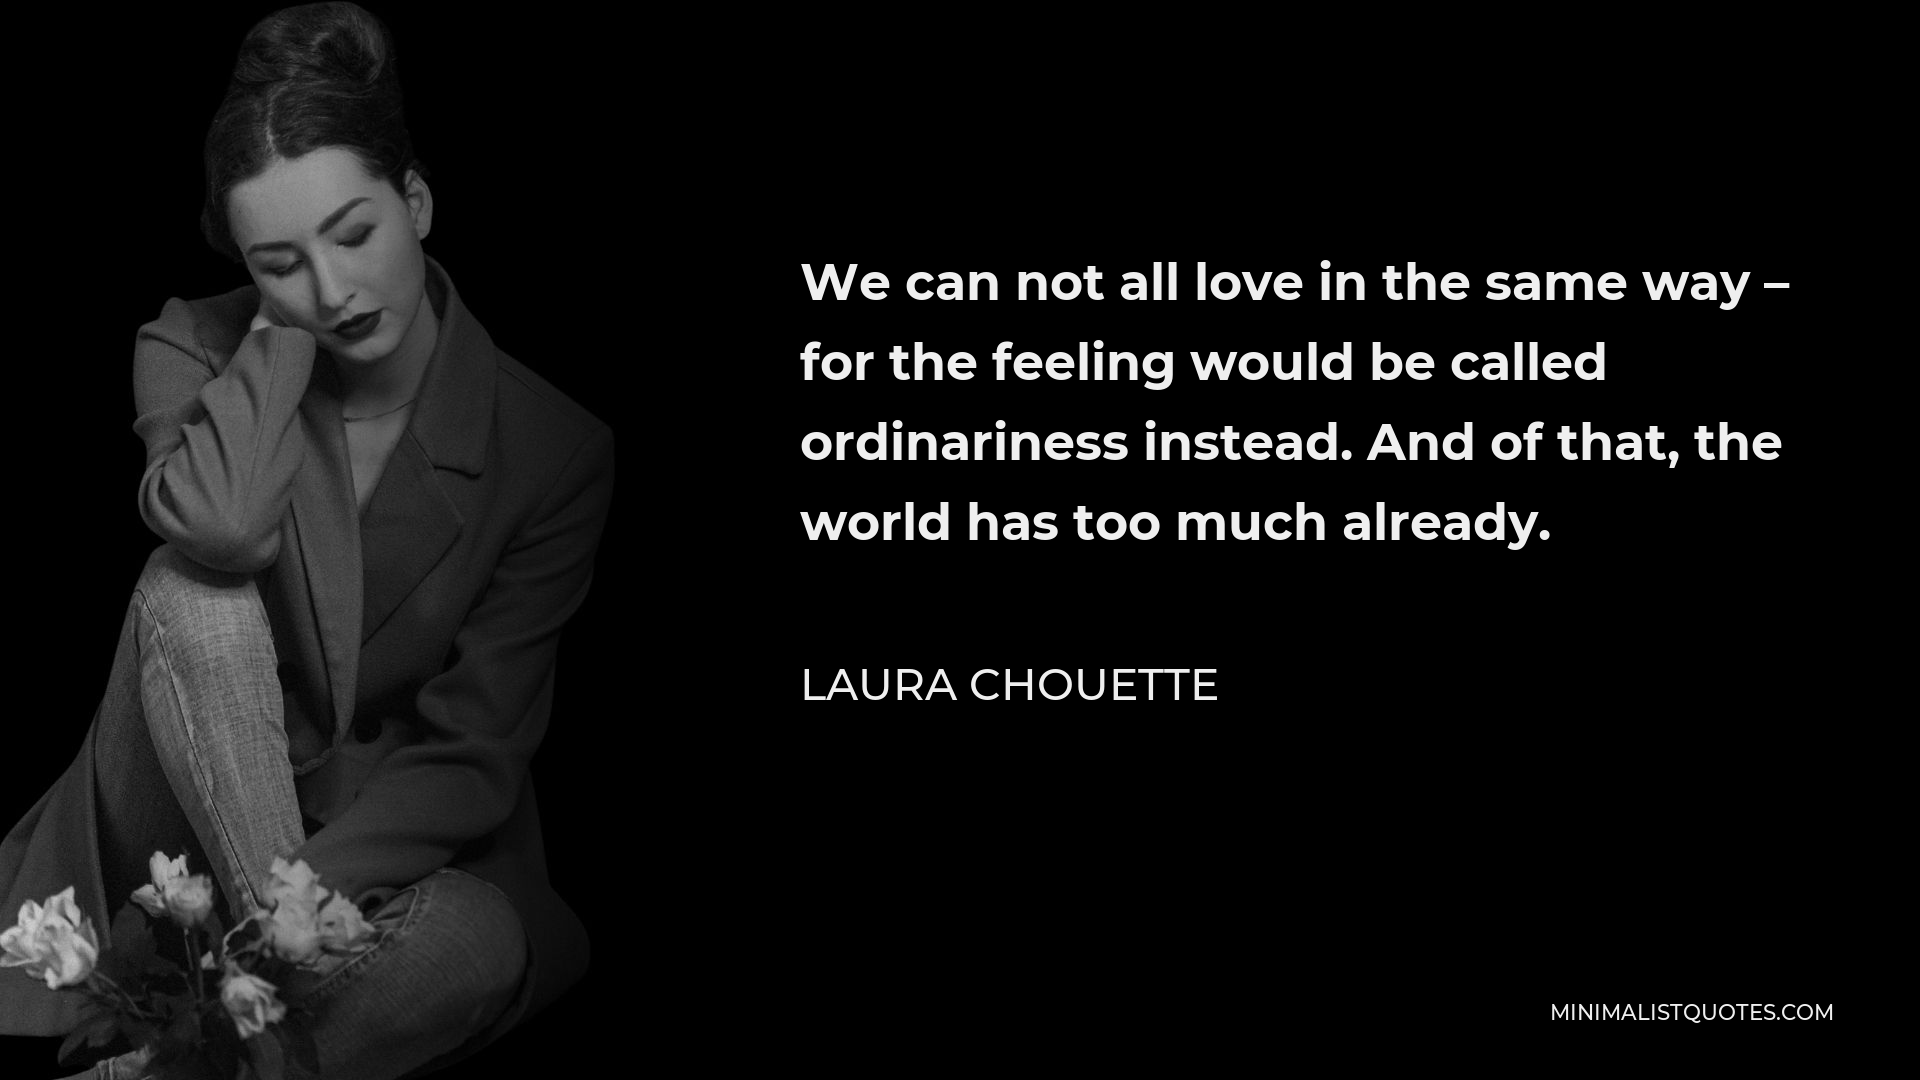 Laura Chouette Quote - We can not all love in the same way – for the feeling would be called ordinariness instead. And of that, the world has too much already.